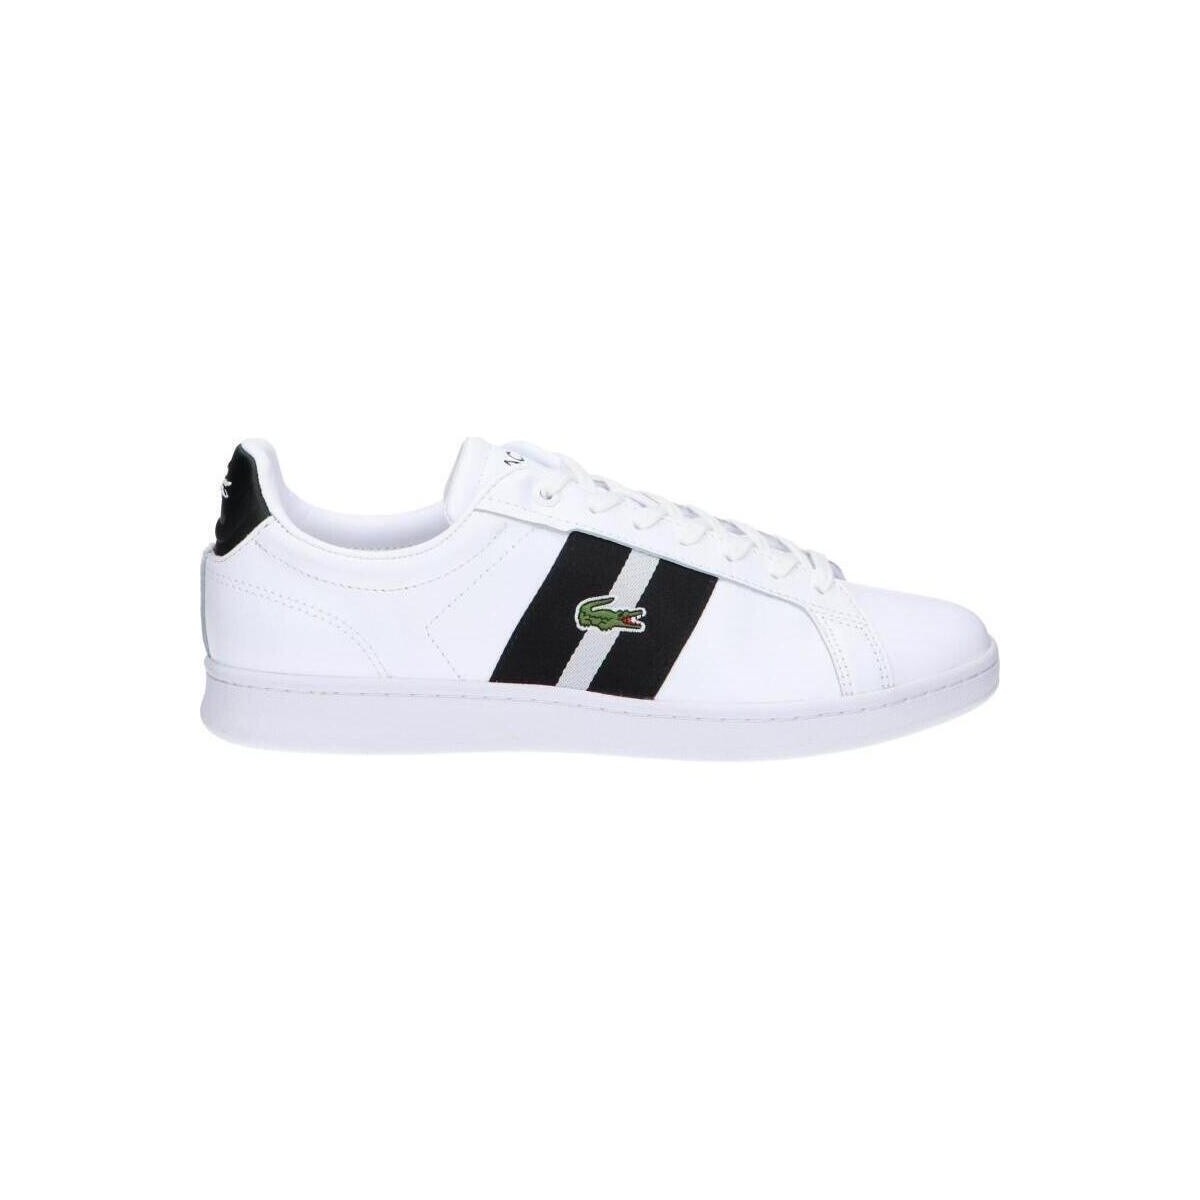 Schuhe Herren Sneaker Lacoste 47SMA0047 CARNABY PRO CGR 47SMA0047 CARNABY PRO CGR 